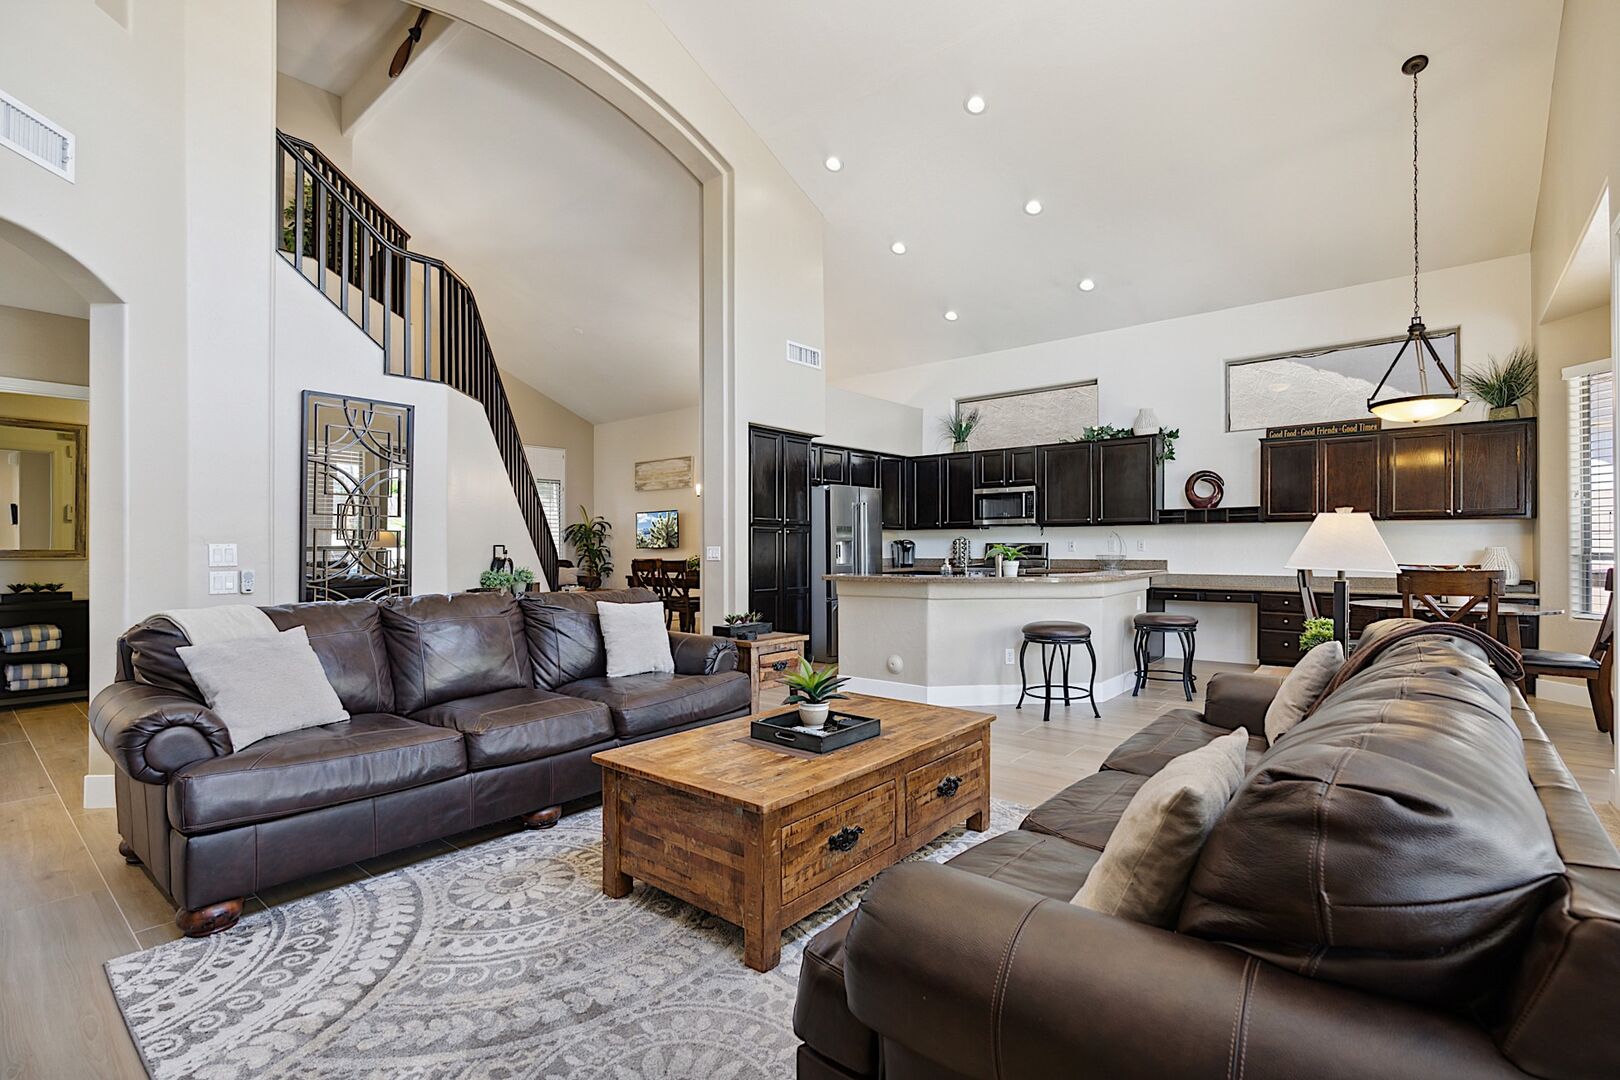 High ceilings and open-concept